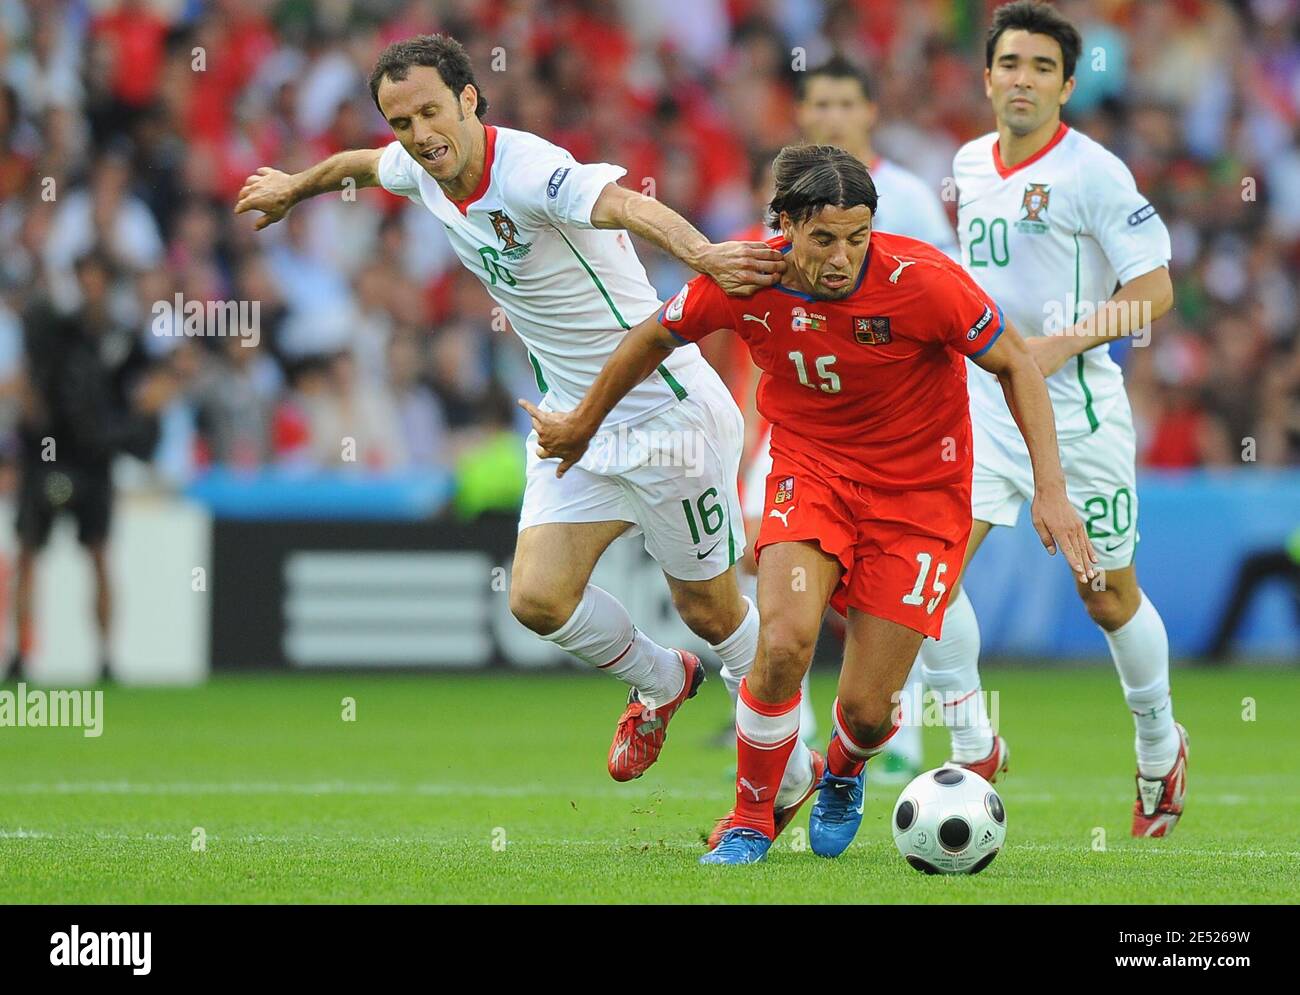 Czech Republic's Milan Baros and Portugal's Ricardo Carvalho battle for the ball during the Euro 2008 UEFA Championships soccer match, Group A, Portugal vs Czech Republic at Stade de Geneve in Geneva, Switzerland on June 11, 2008. Portugal won 3-1. Photo by Steeve McMay/Cameleon/ABACAPRESS.COM Stock Photo